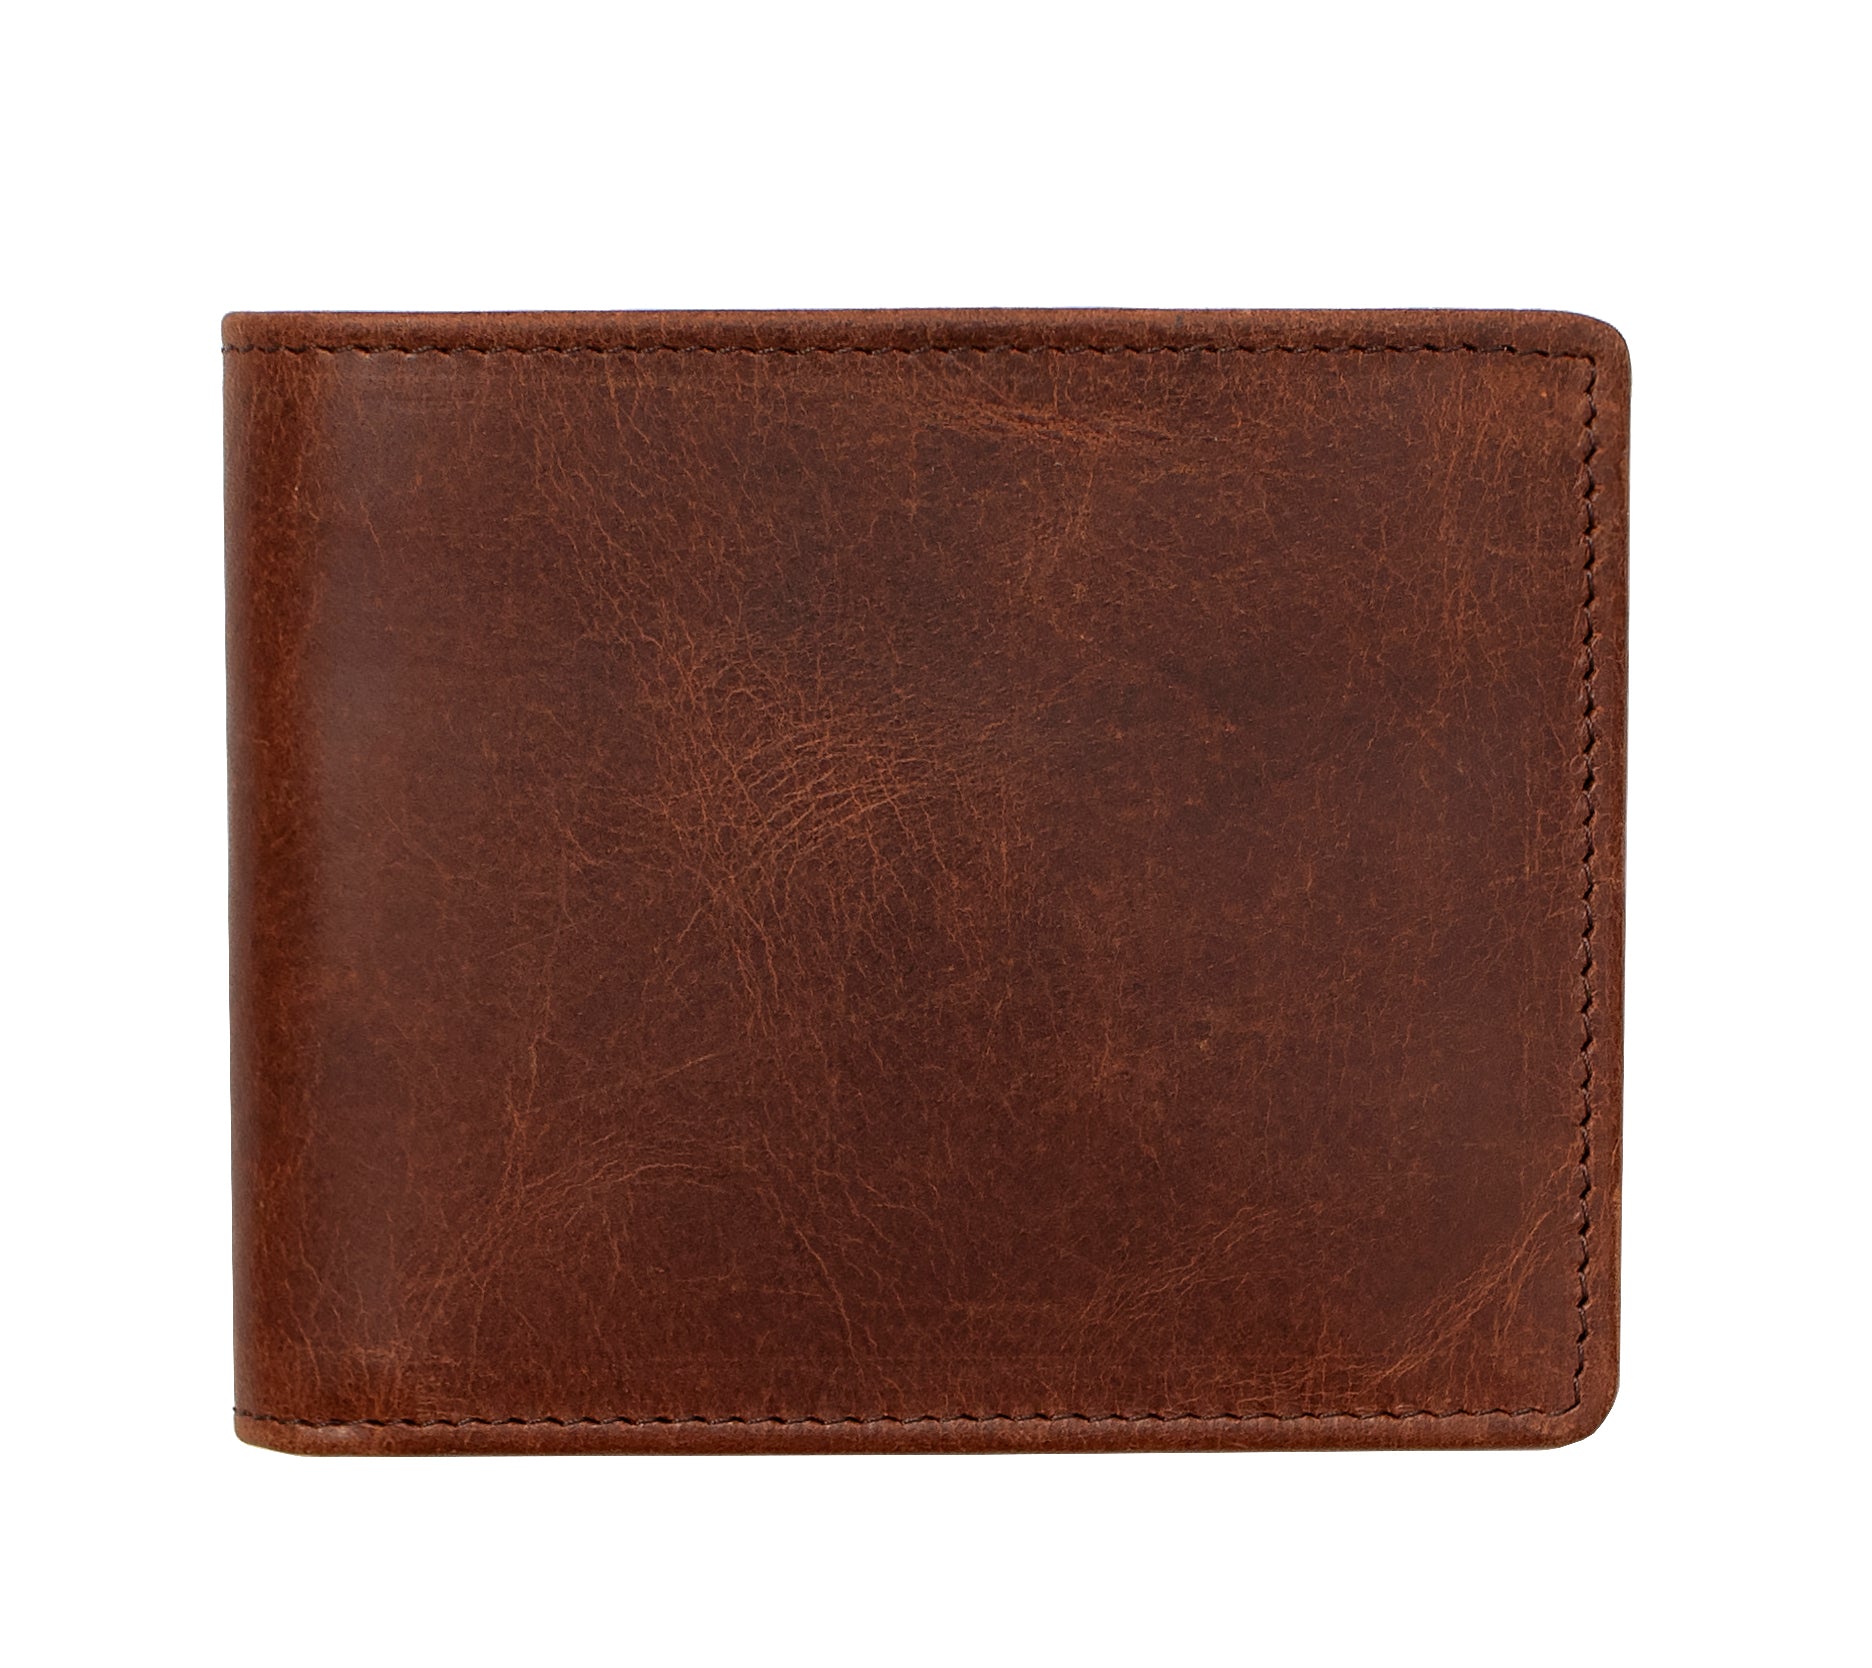 PRIMEHIDE Leather Buff Hunter Bifold Wallet With Coin Pocket - 7008